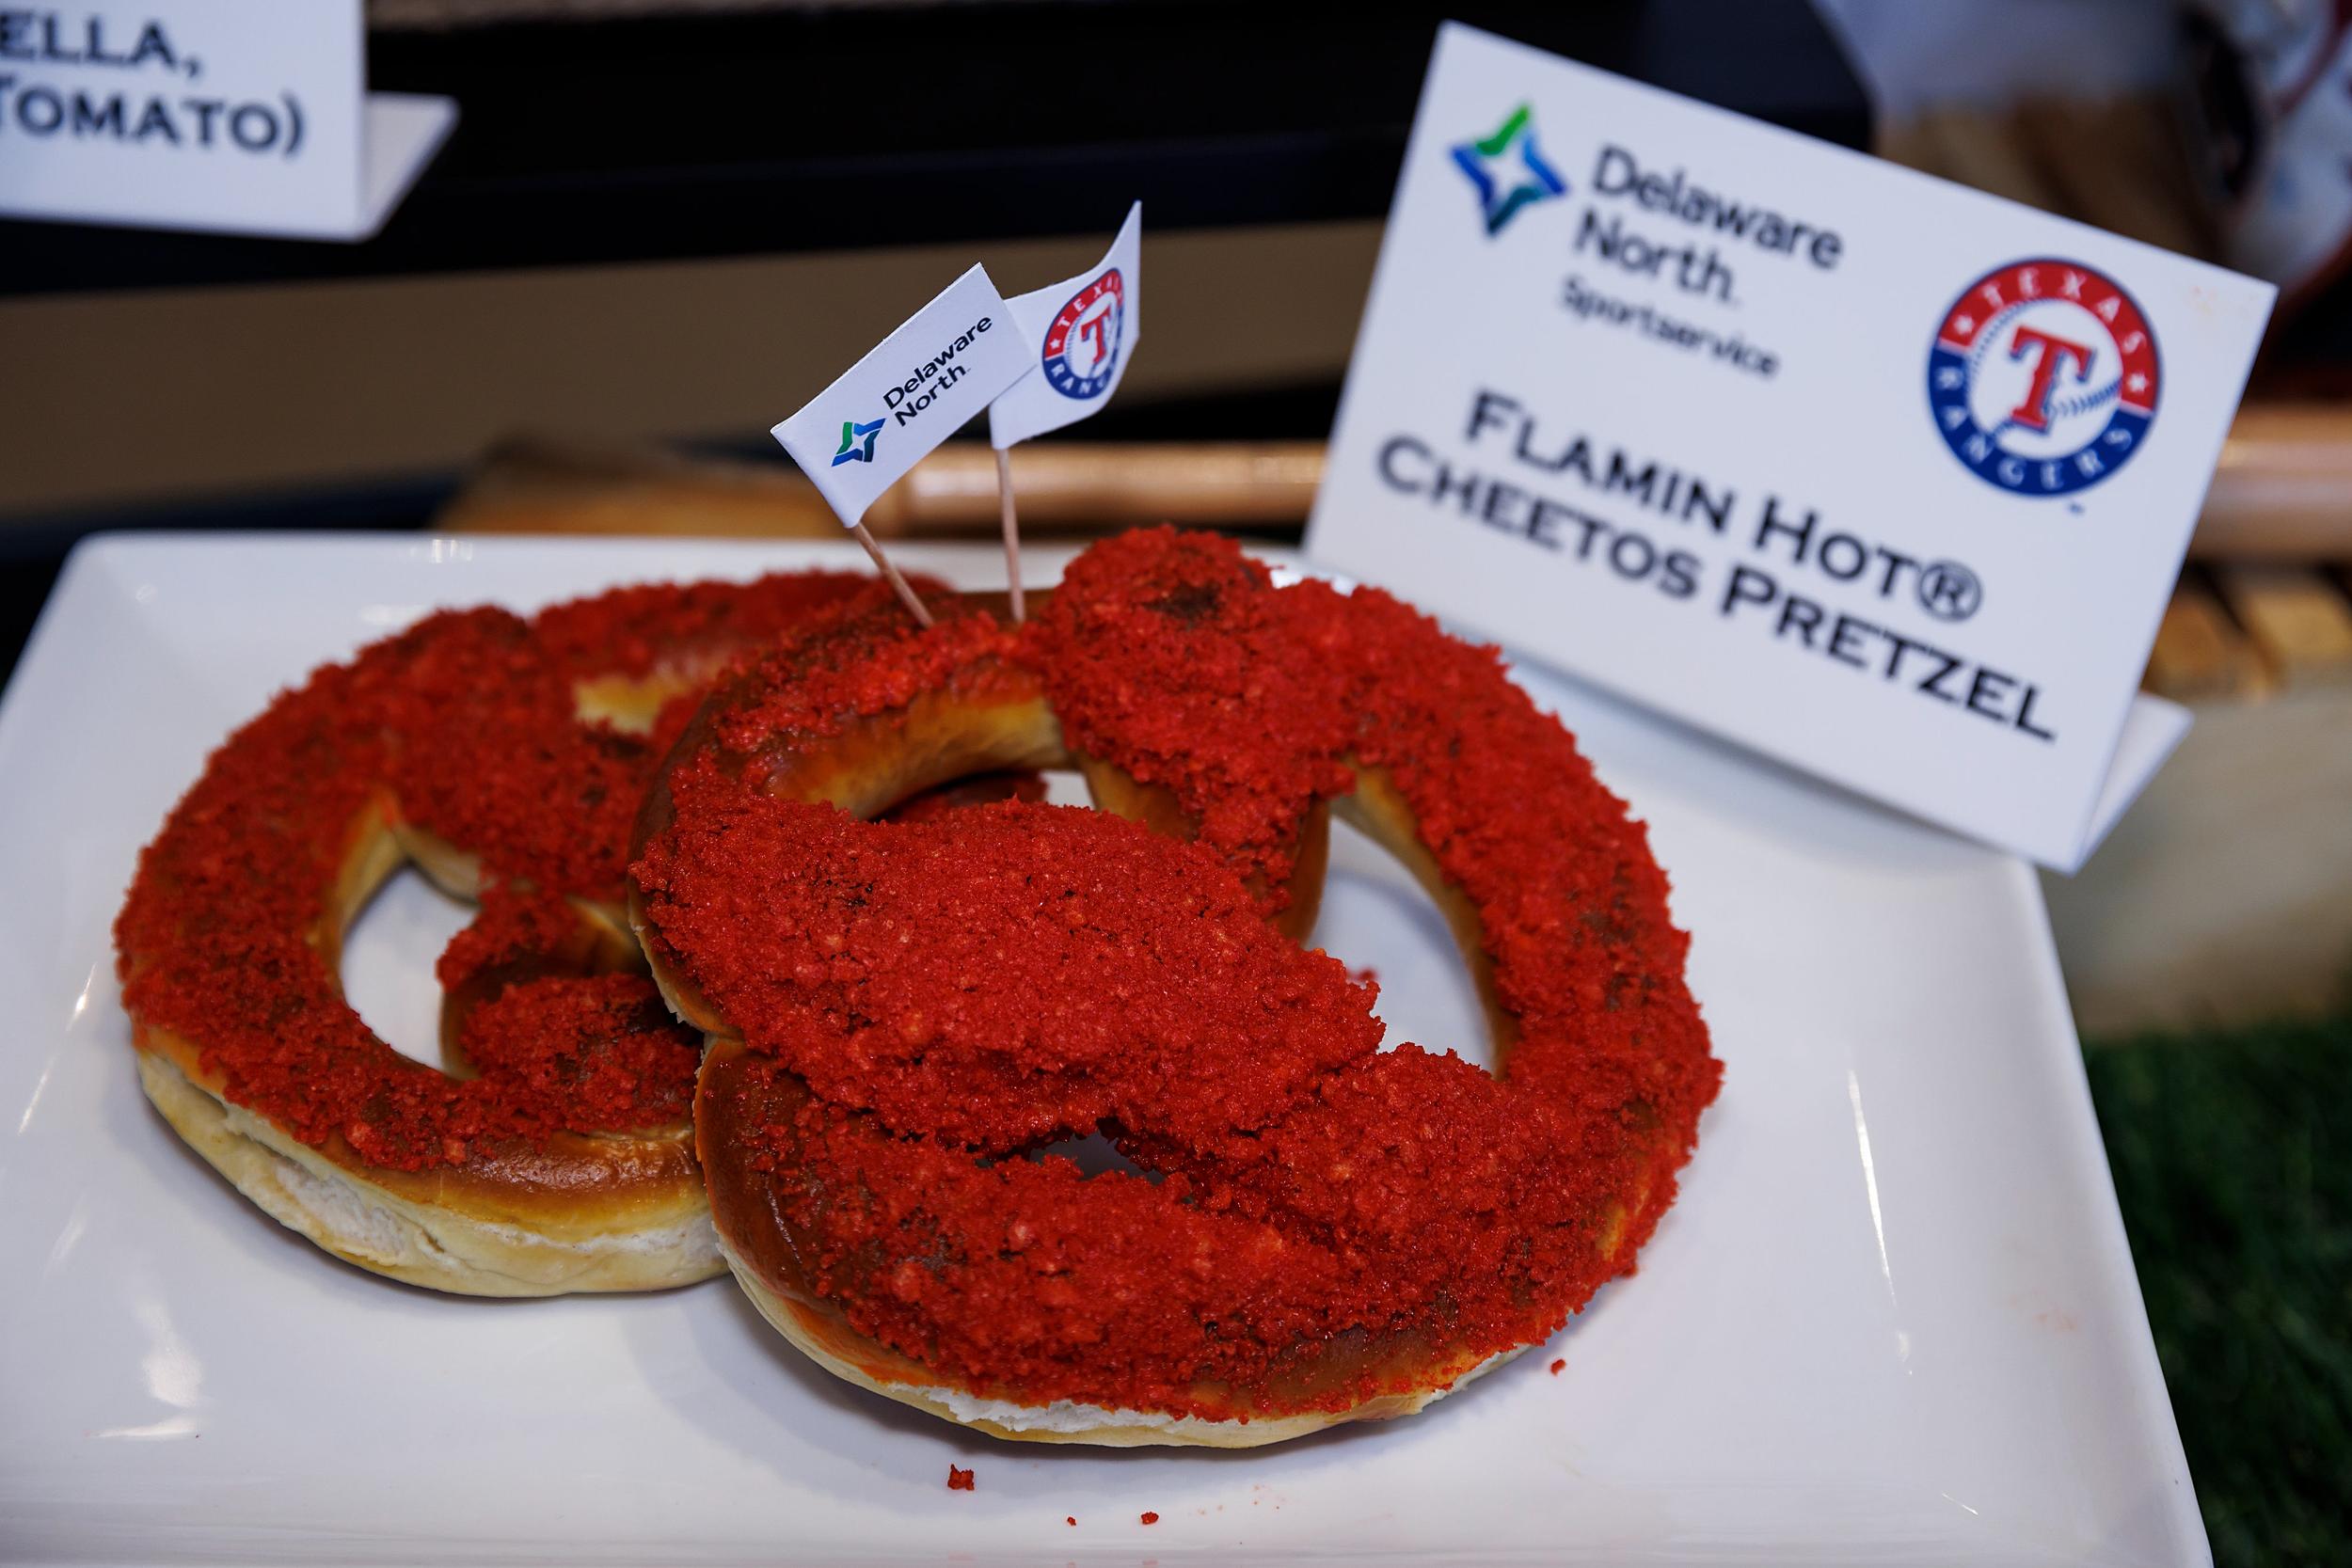 The Texas Rangers May Have Just Unveiled Their Fattest Menu Item